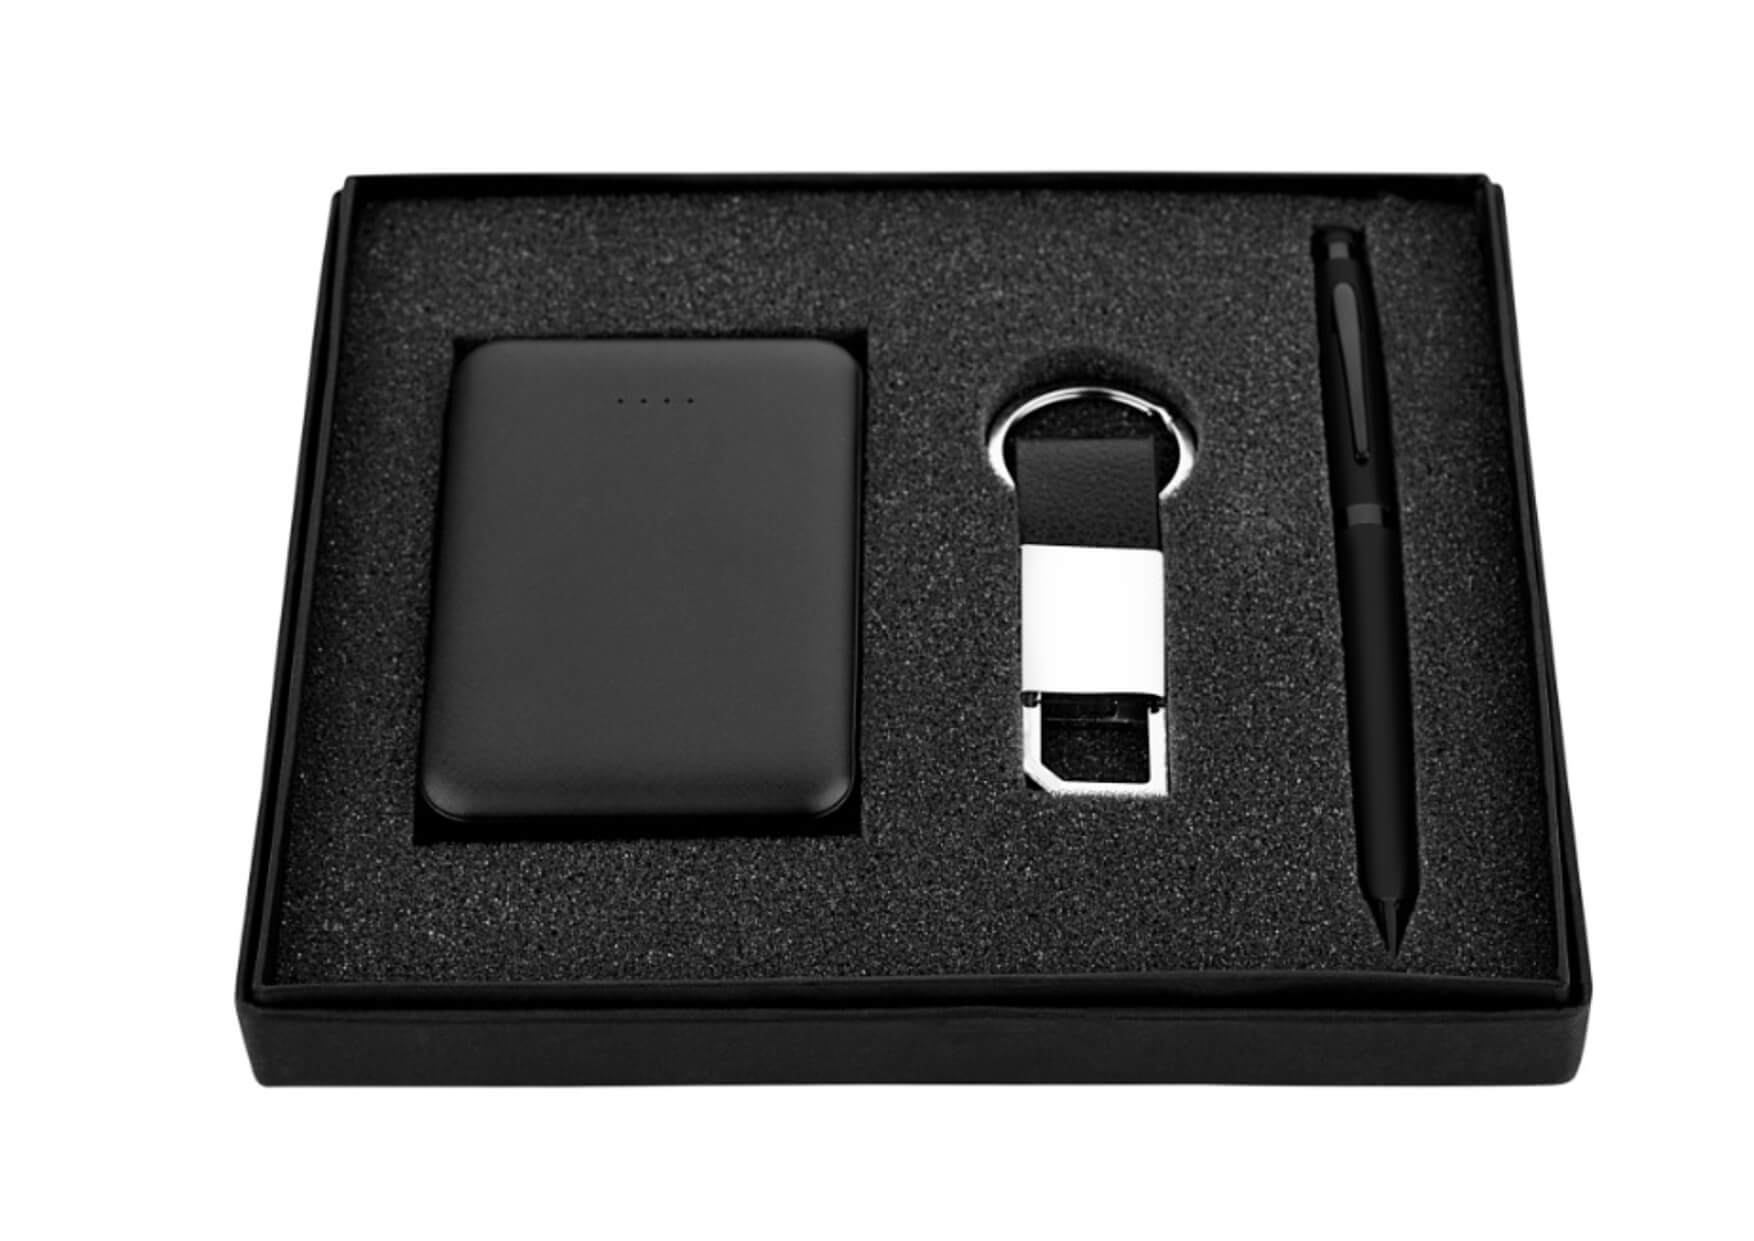 Power Bank, Keychain and Pen Set